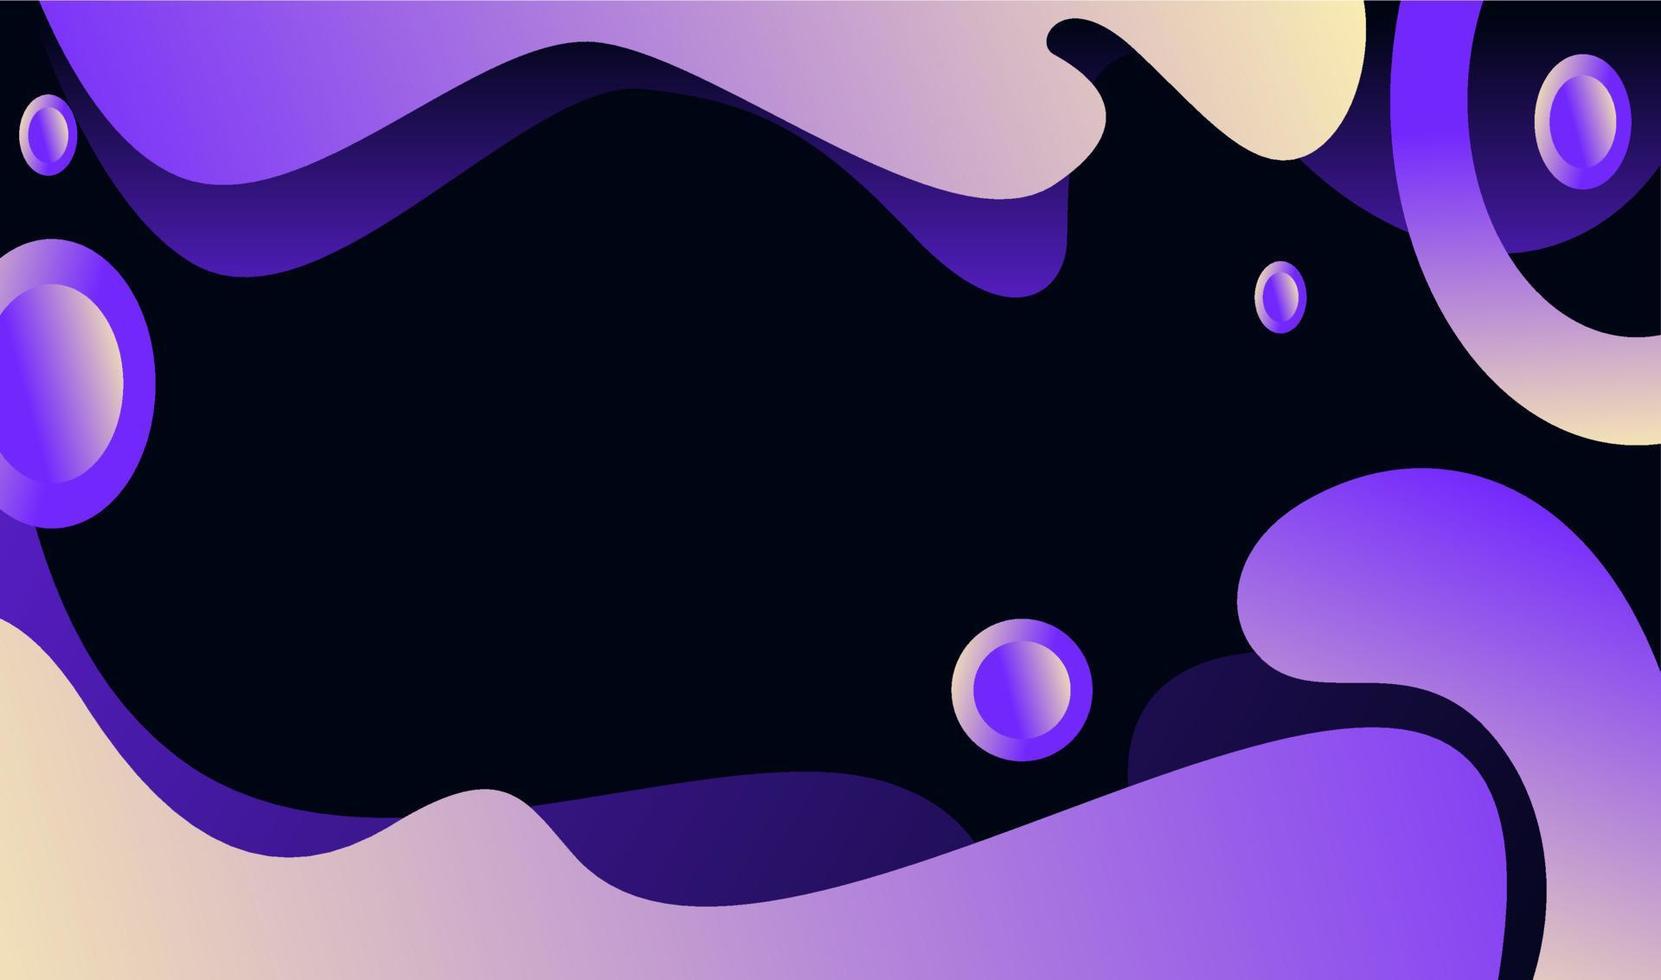 Gradient fluid background purple design layout for banner or poster. Cool fluid vector pattern with moving purple shapes